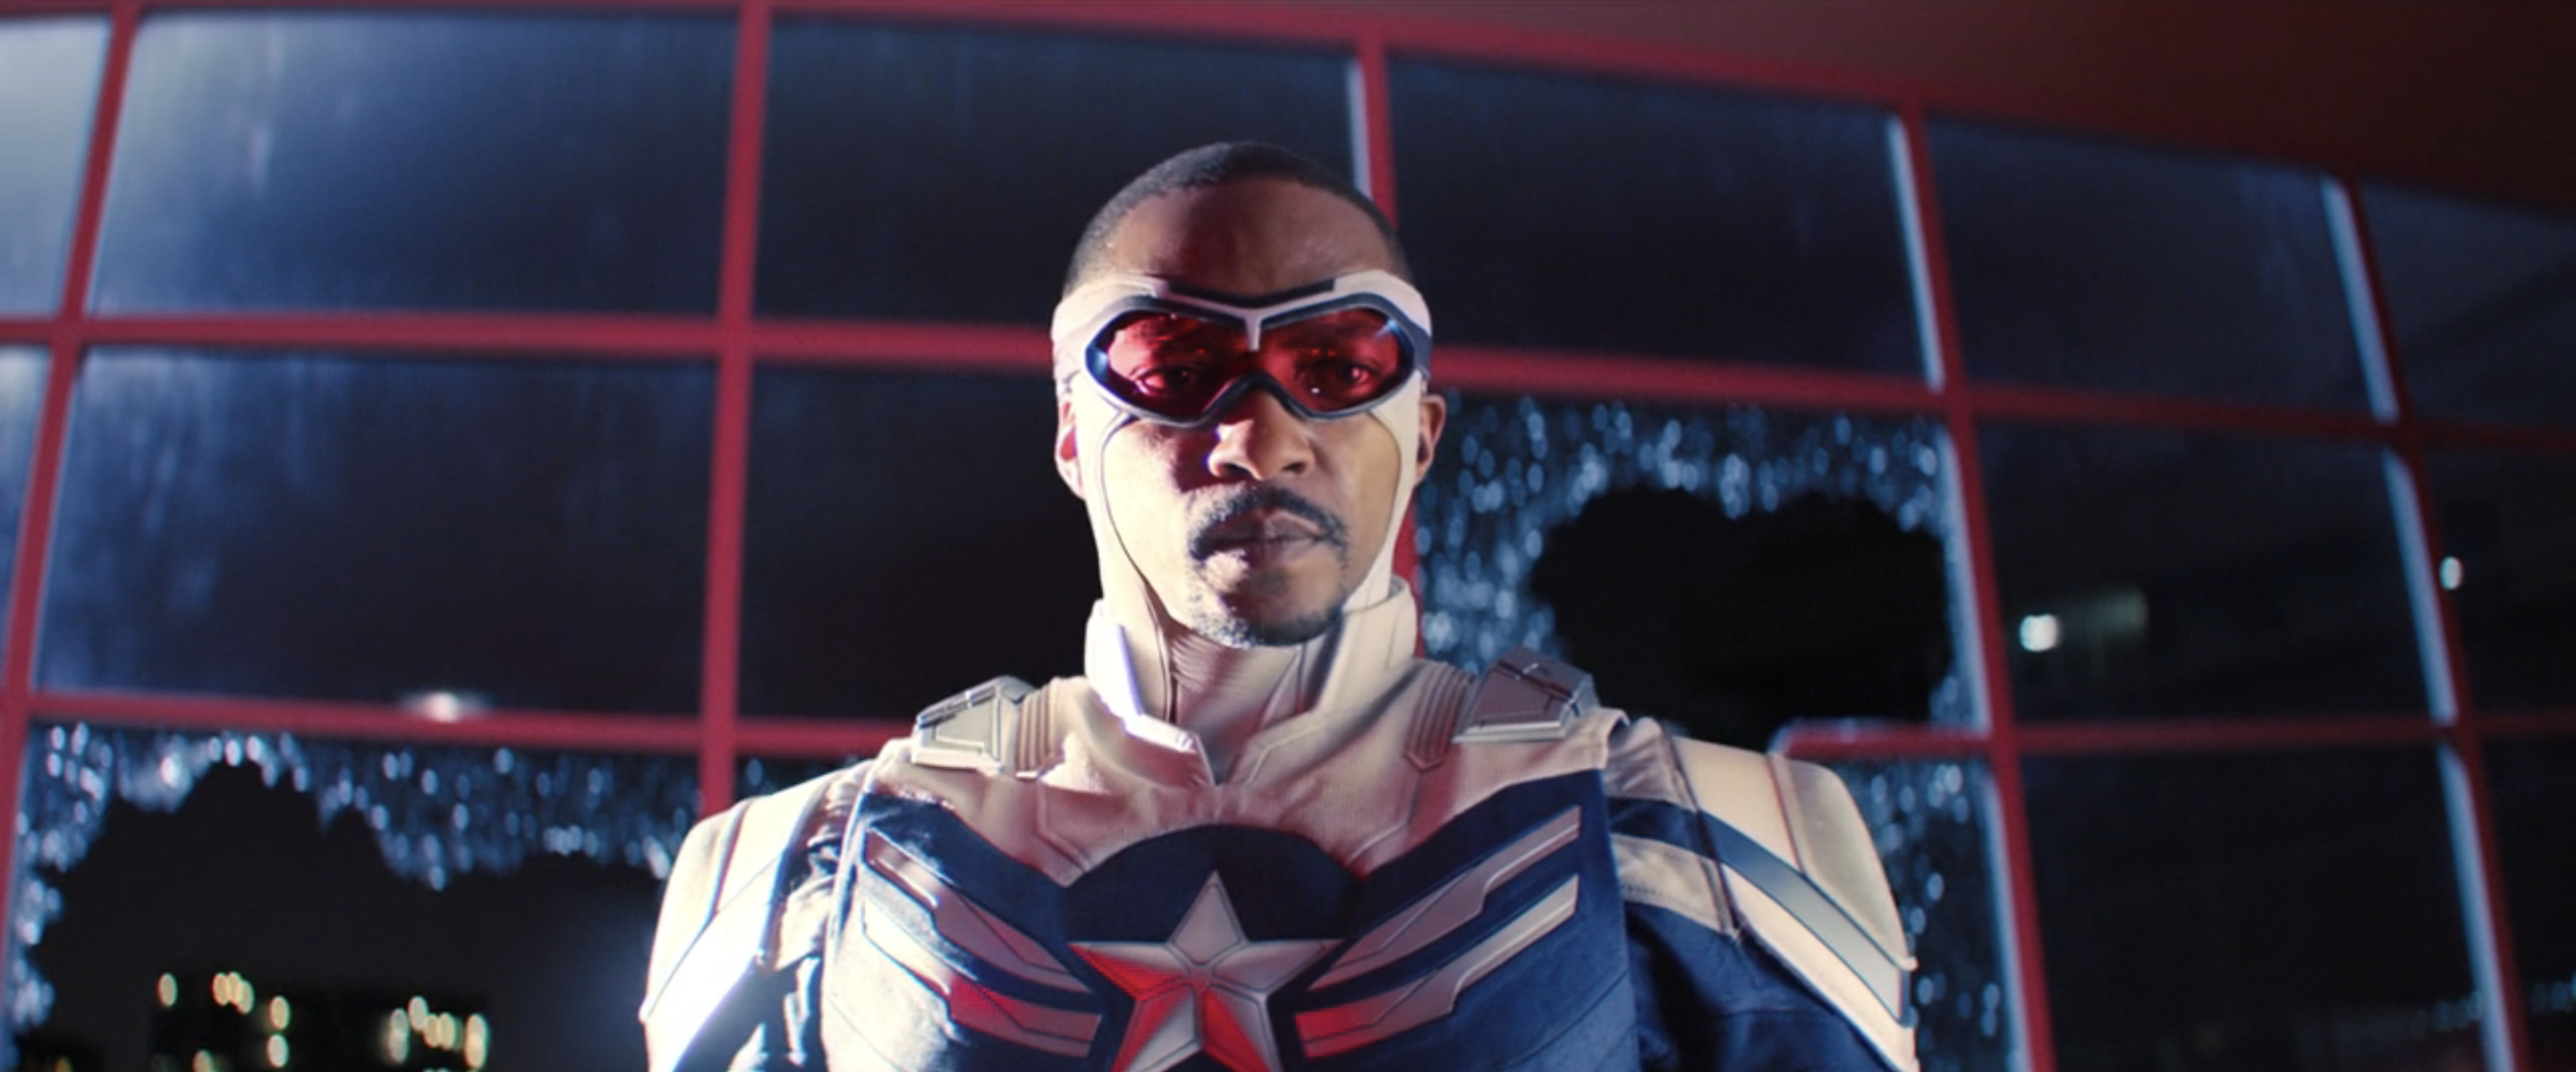 Anthony Mackie as Captain America, with his suit in the colors of the American flag, in The Falcon and the Winter Soldier.